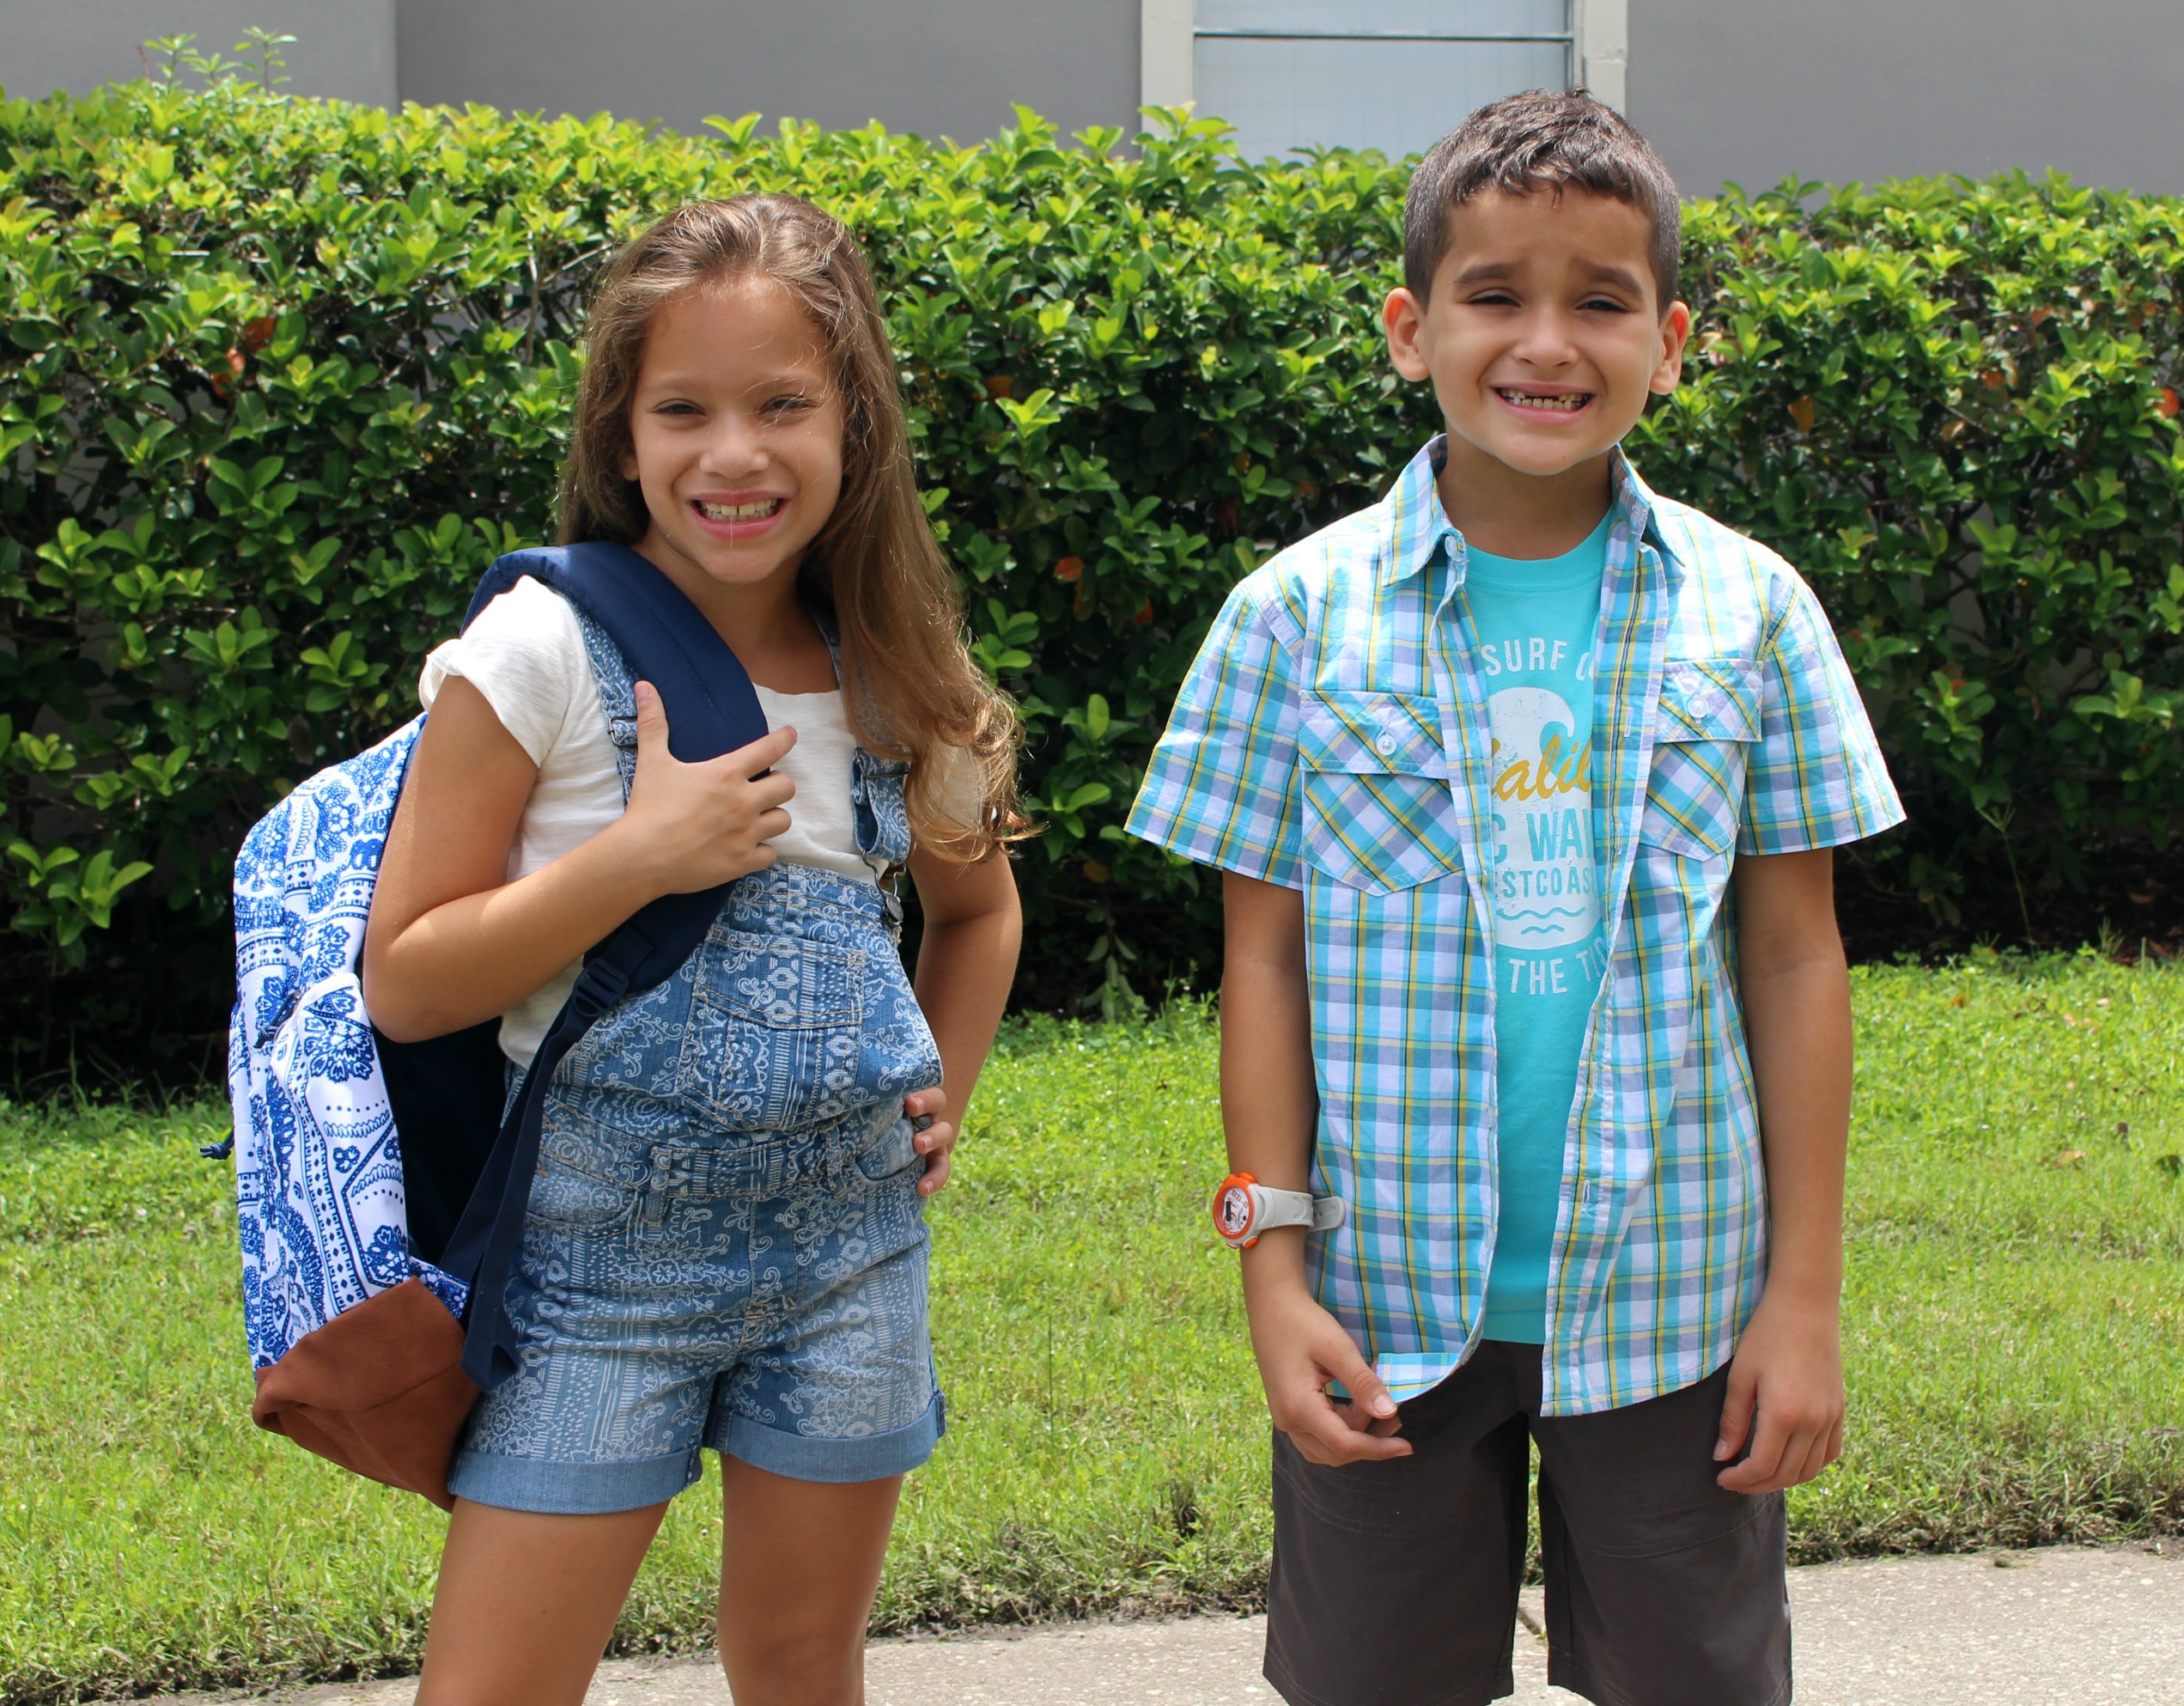 Gear-Up-With-Sears-first-day-of-school-twins